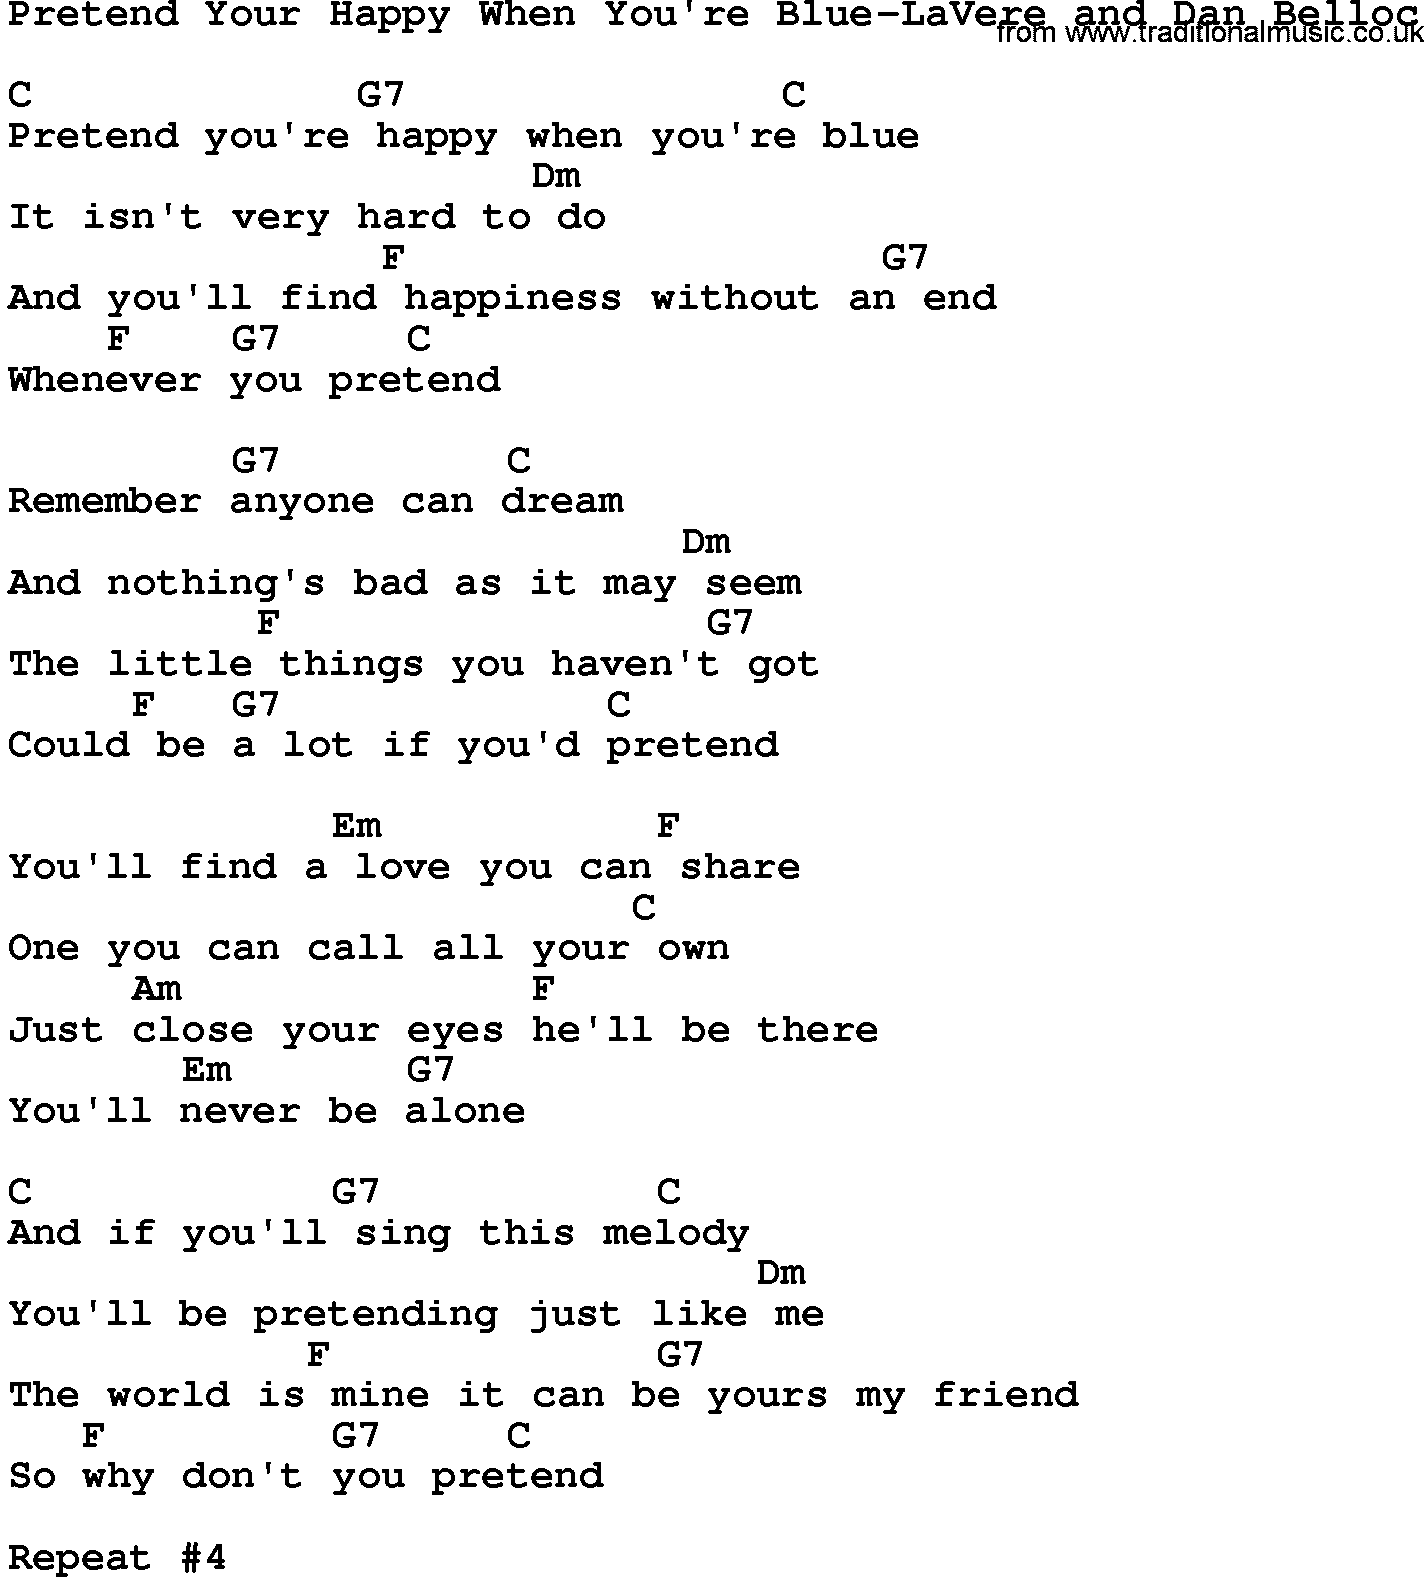 Country music song: Pretend Your Happy When You're Blue-Lavere And Dan Belloc lyrics and chords